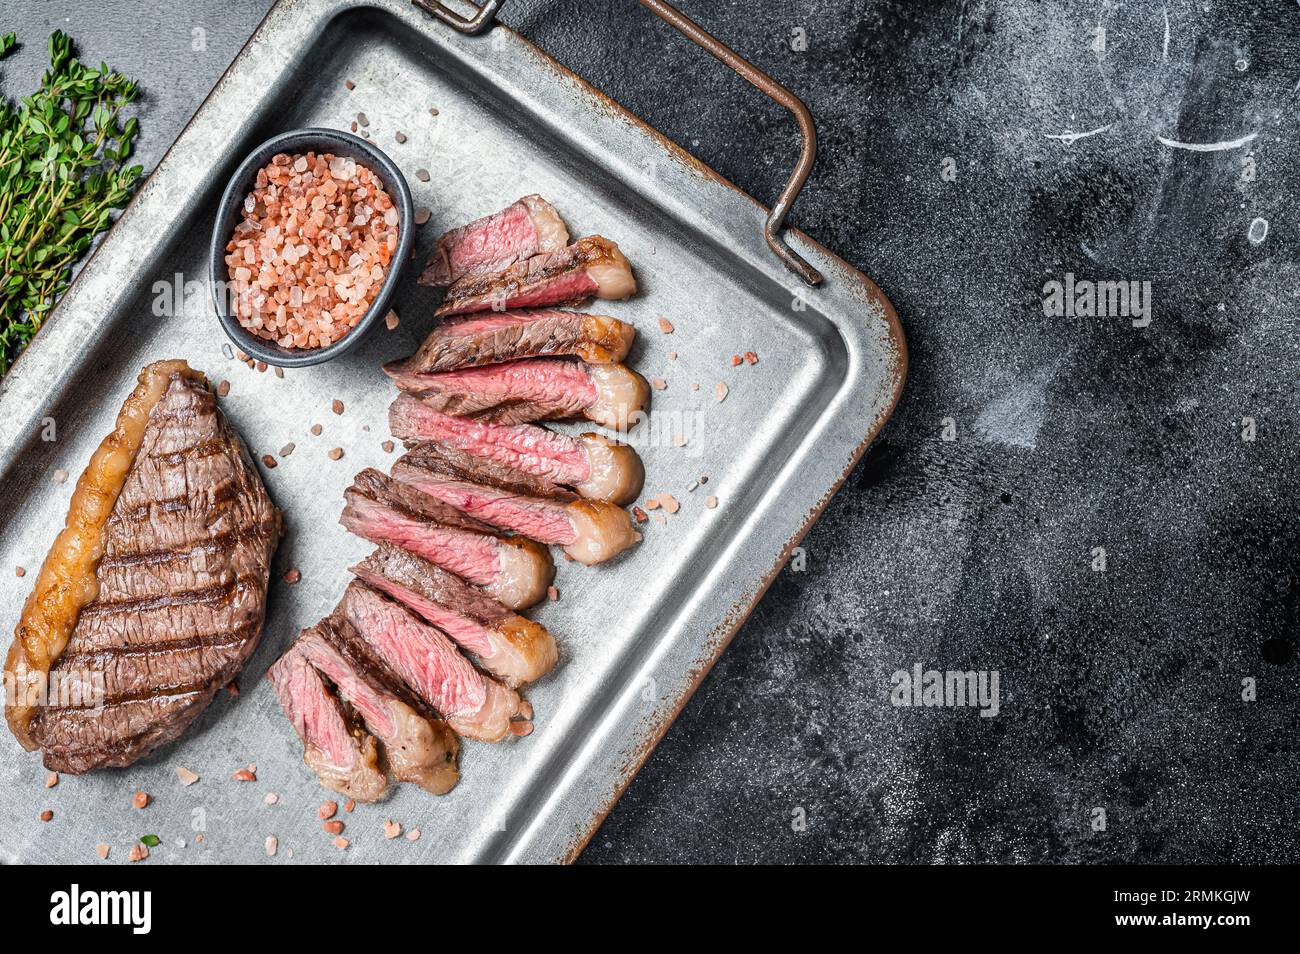 Grilled and sliced brazilian Picanha steak, cup rump beef meat steak on a steel serving tray with herbs. Black background. Top view. Copy space. Stock Photo